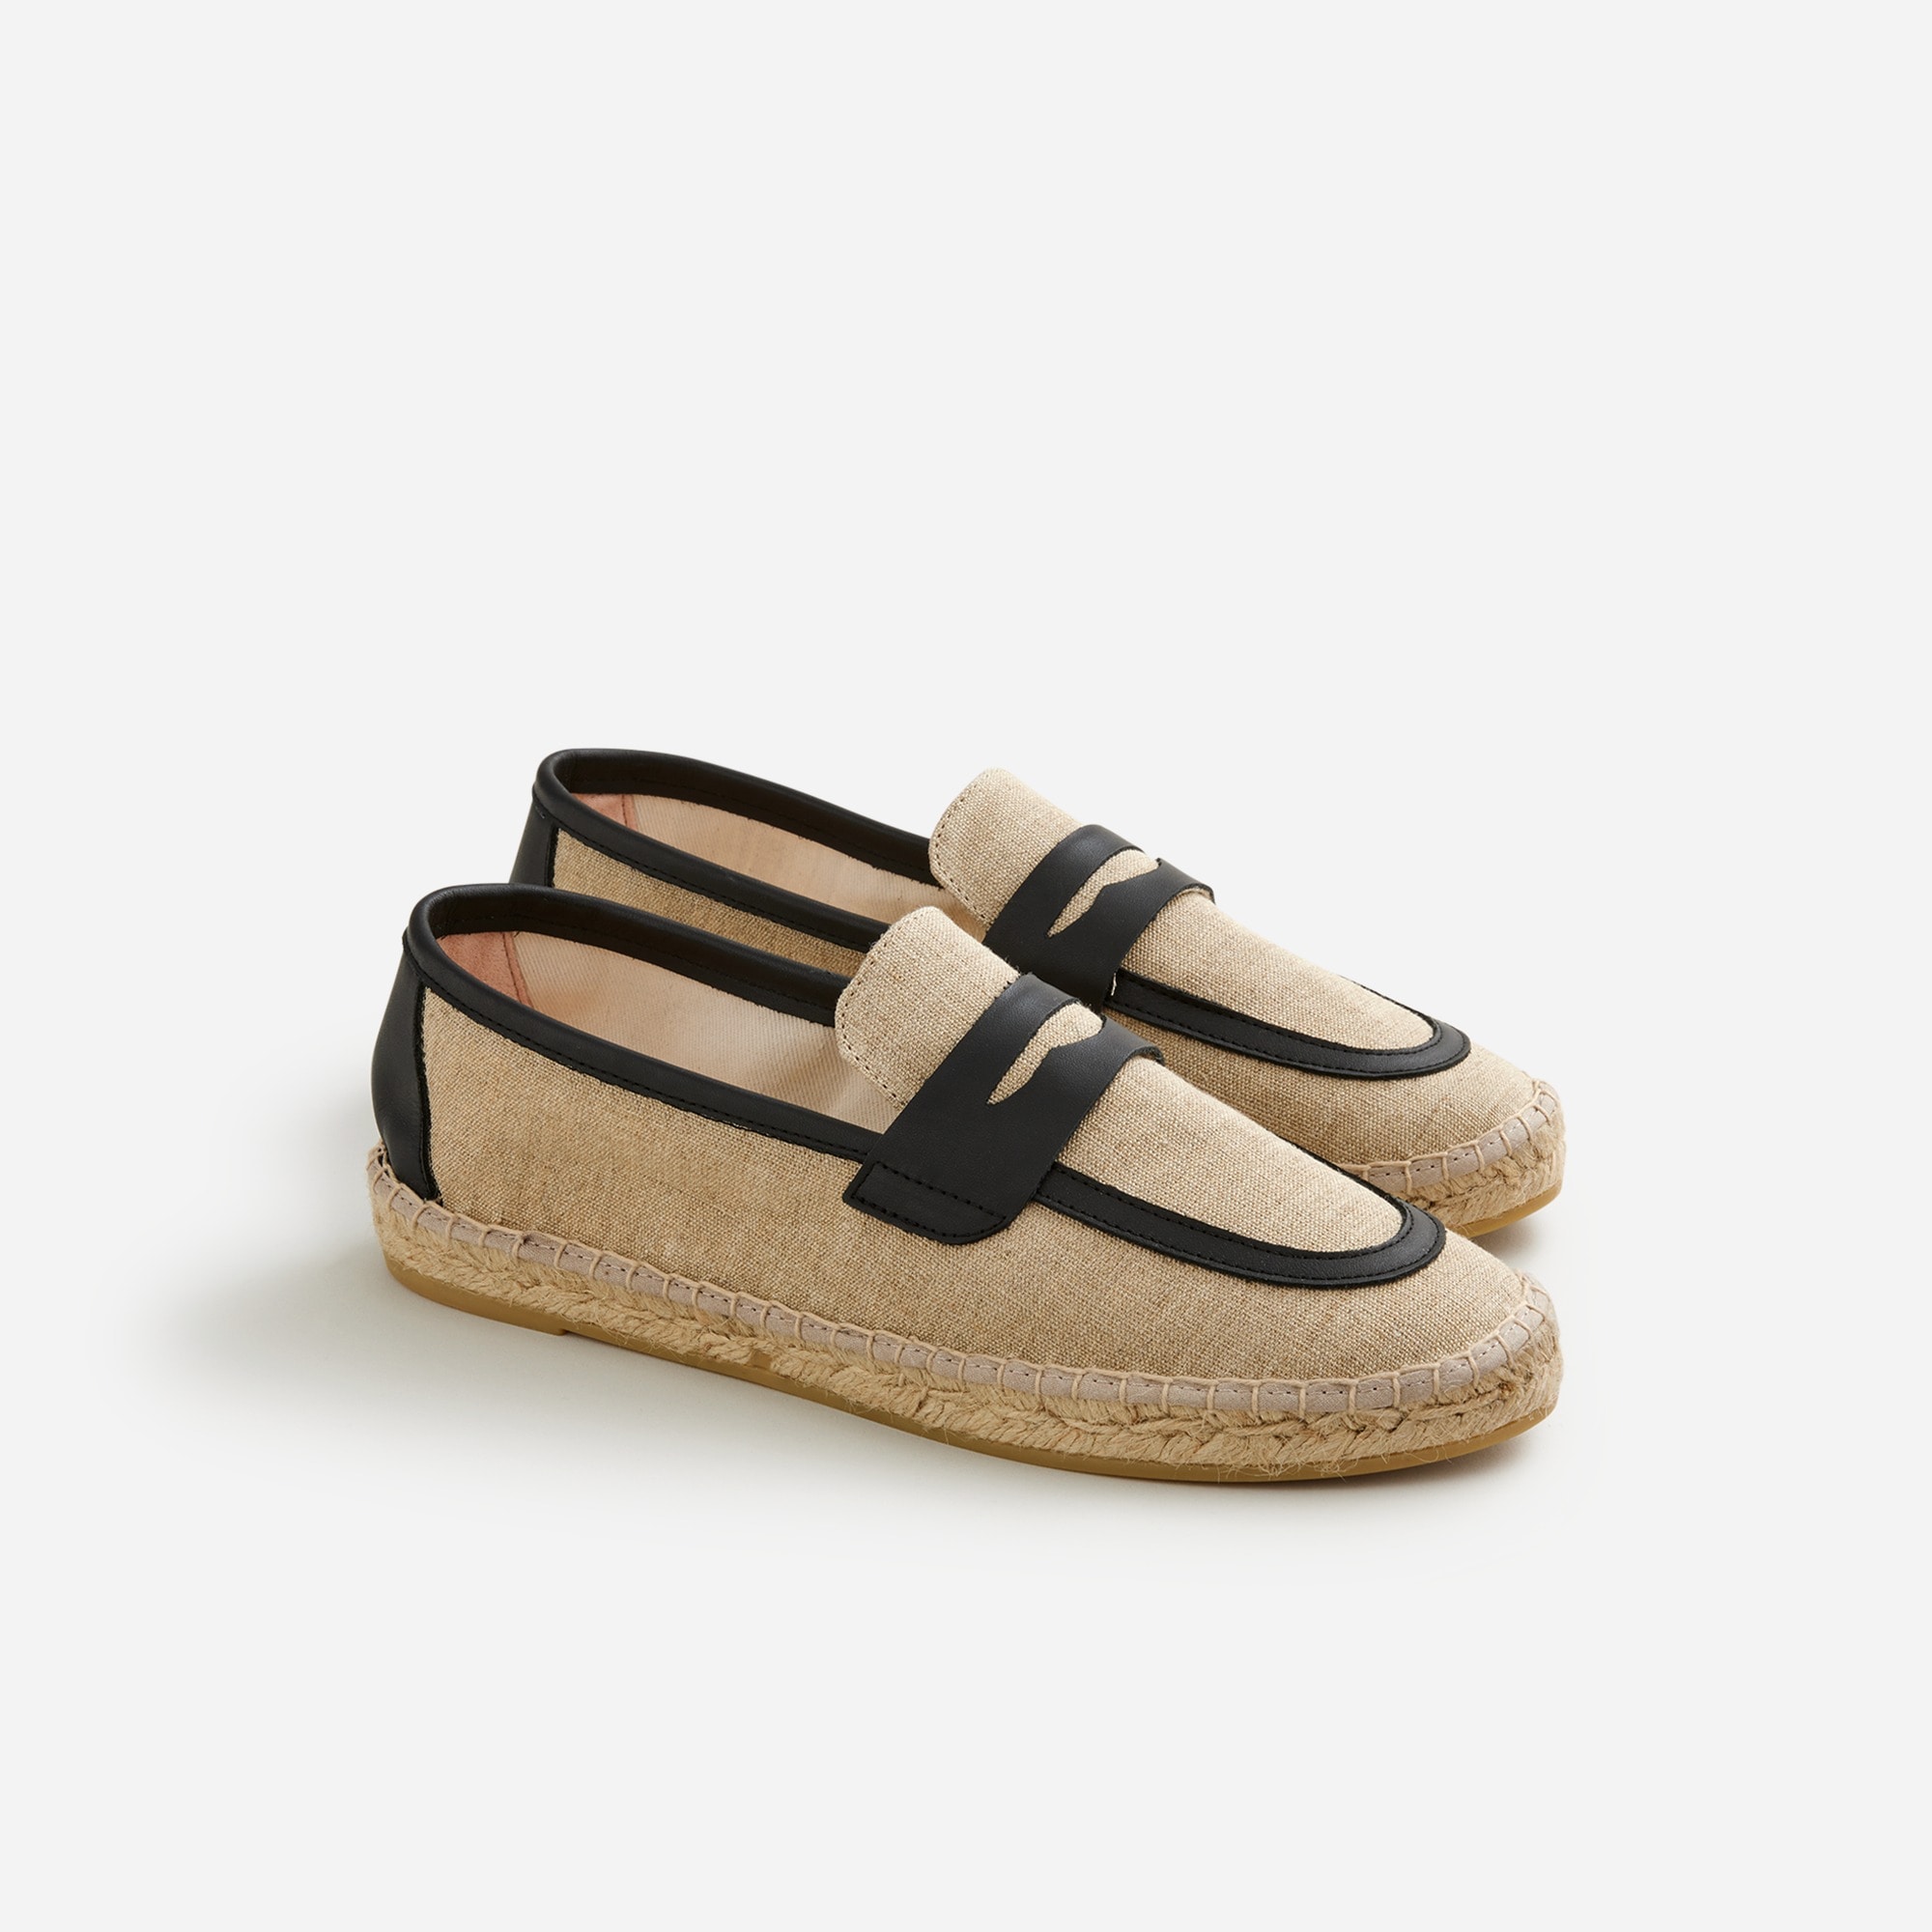  Made-in-Spain loafer espadrilles in linen blend and leather